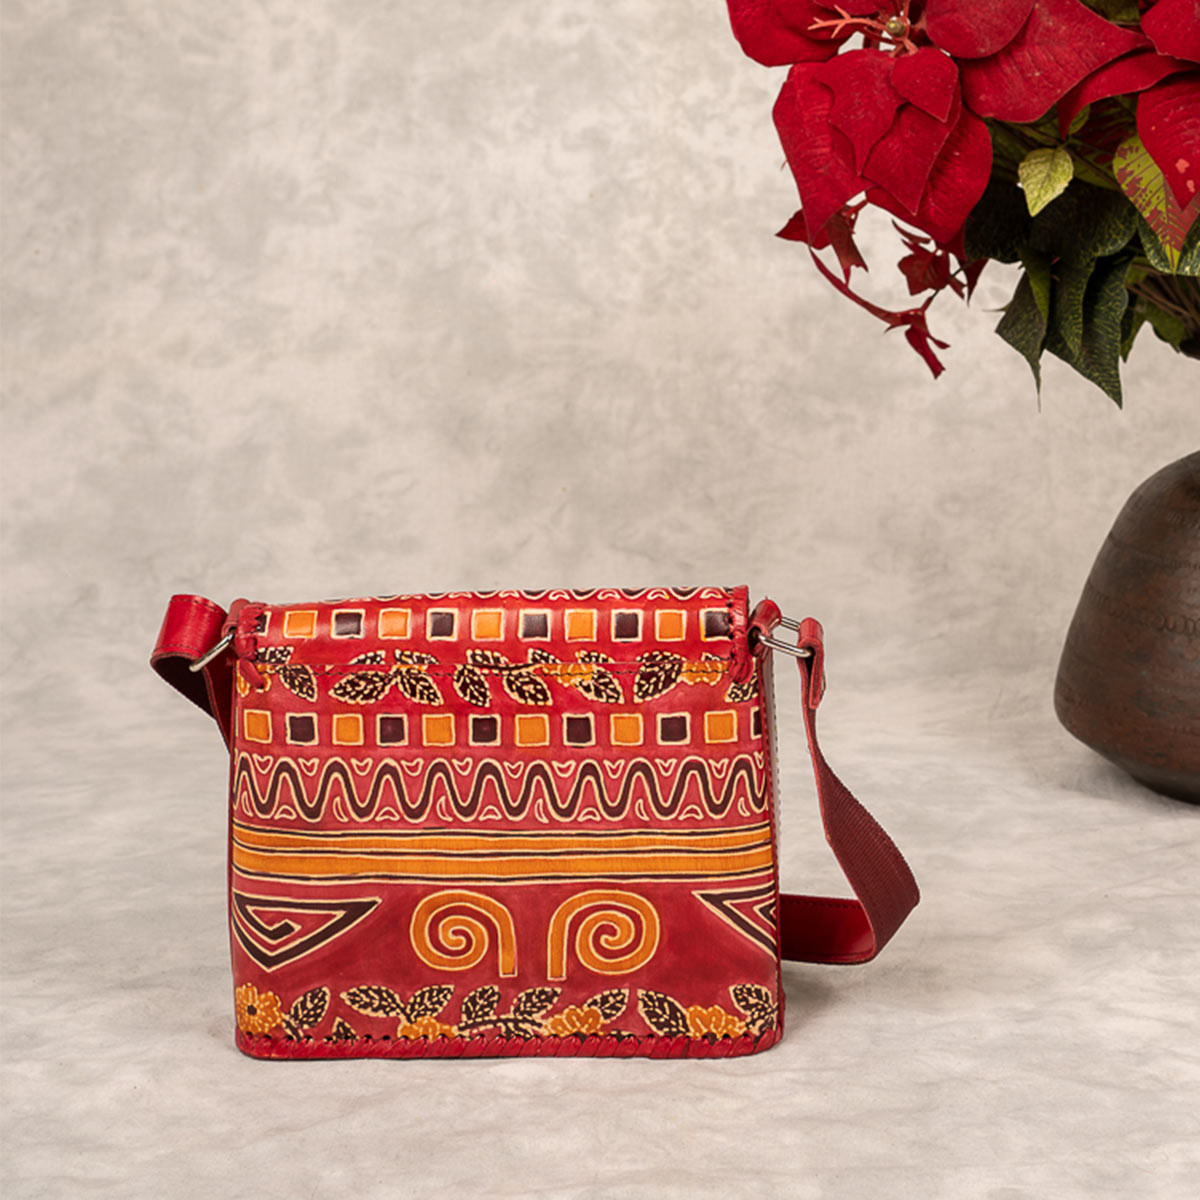 Buy red printed leather bags from Amar Kutir online